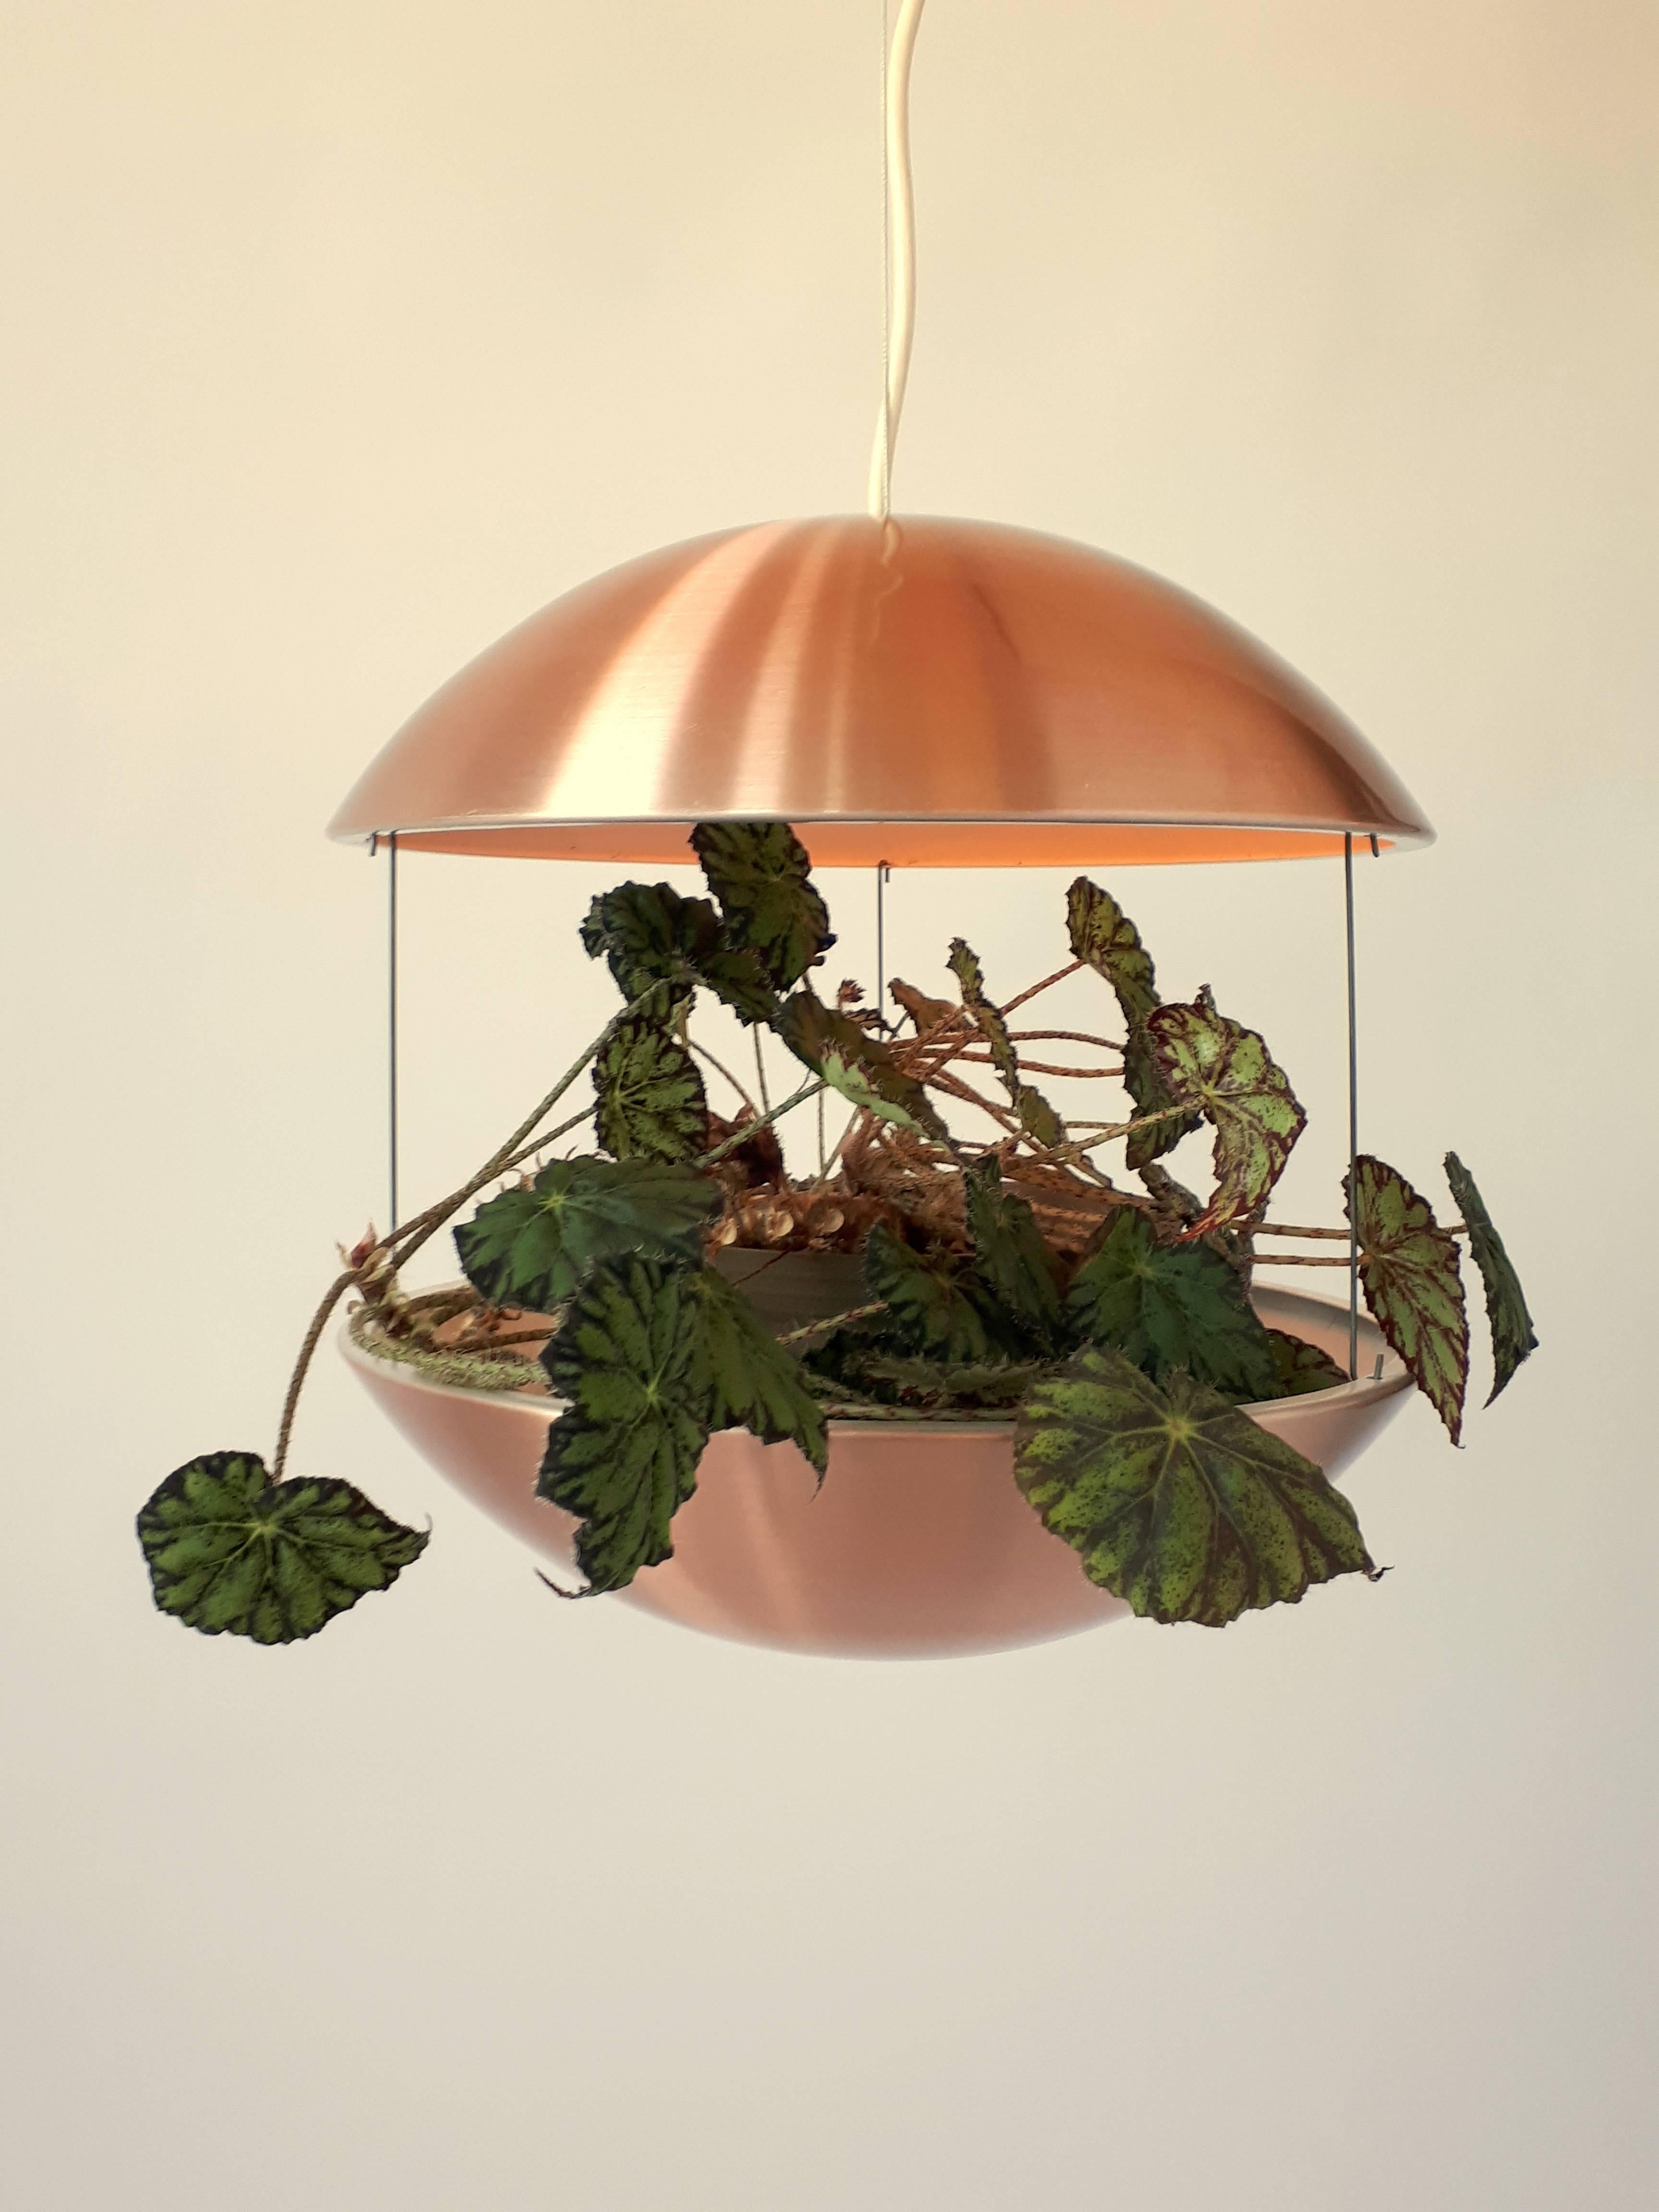 Small lighted planter consisting of two halves of copper plated aluminium enameled white inside and hung together by three thin steel rods. 

The top part is vented and contain a E26 ceramic socket rated at 60 watts max. 

Come with 10 feet of